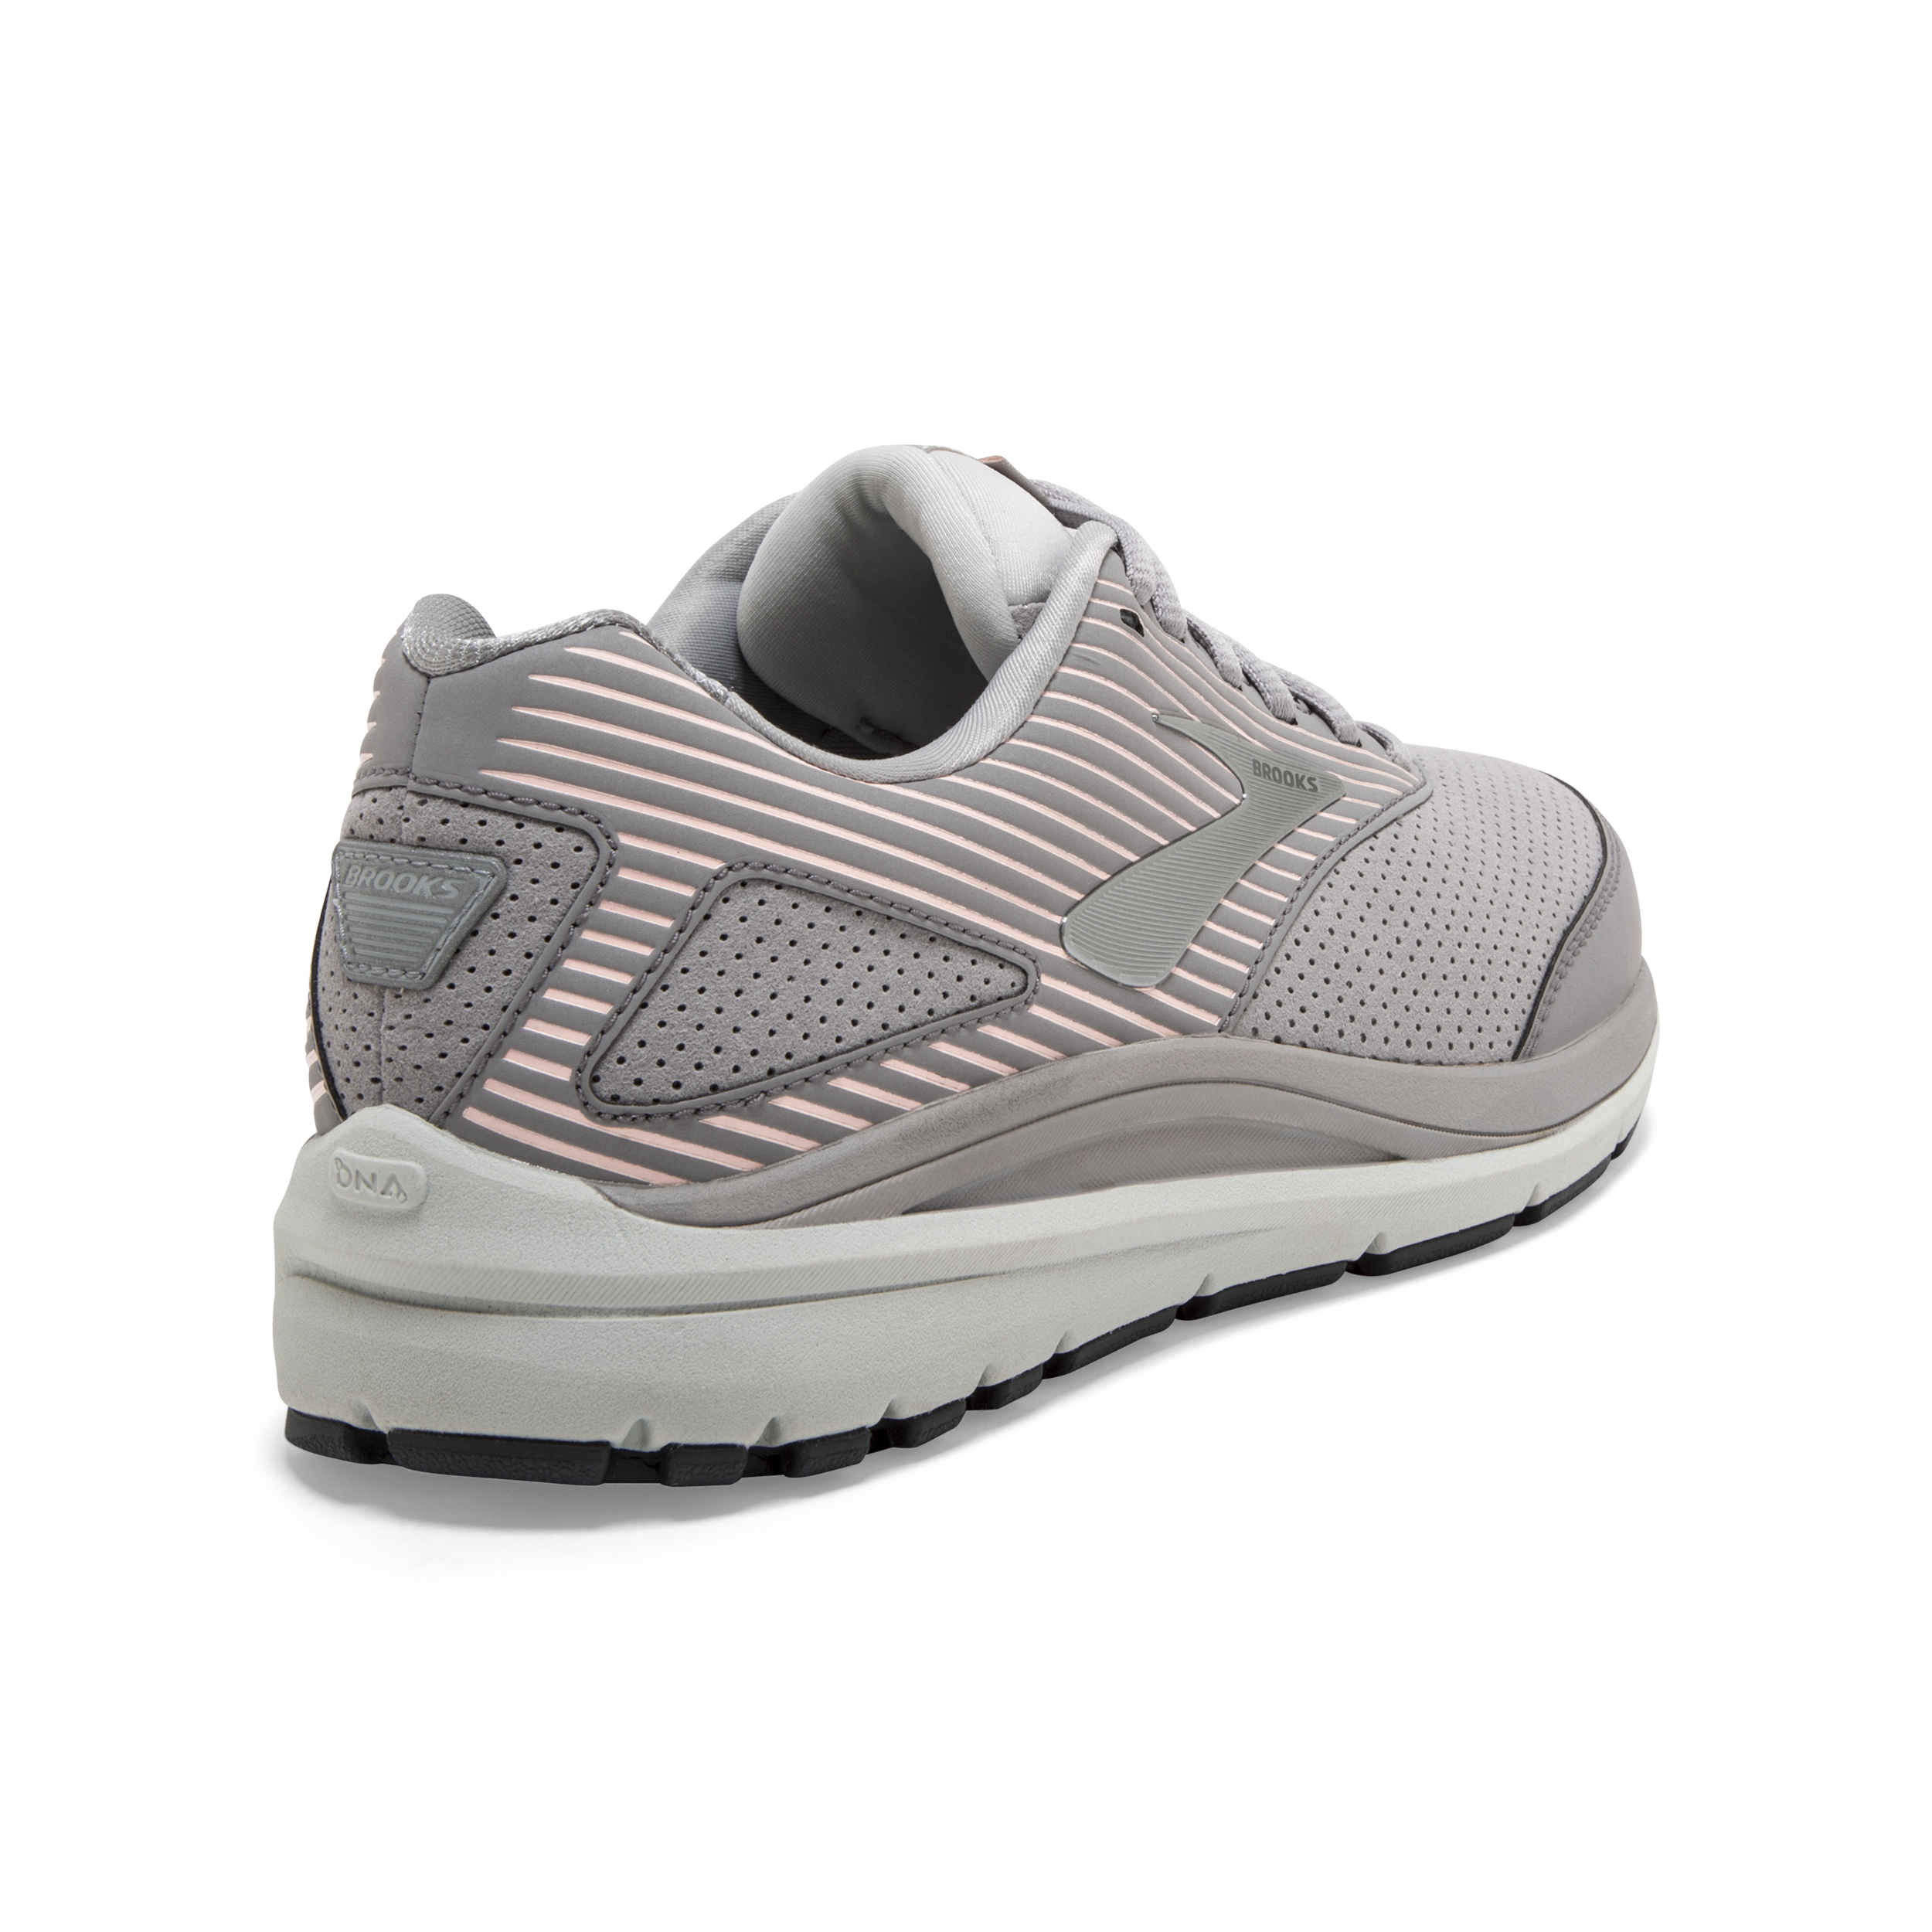 Brooks Addiction Walker Womens Leather Walking Shoes FREE DELIVERY AUS WIDE 